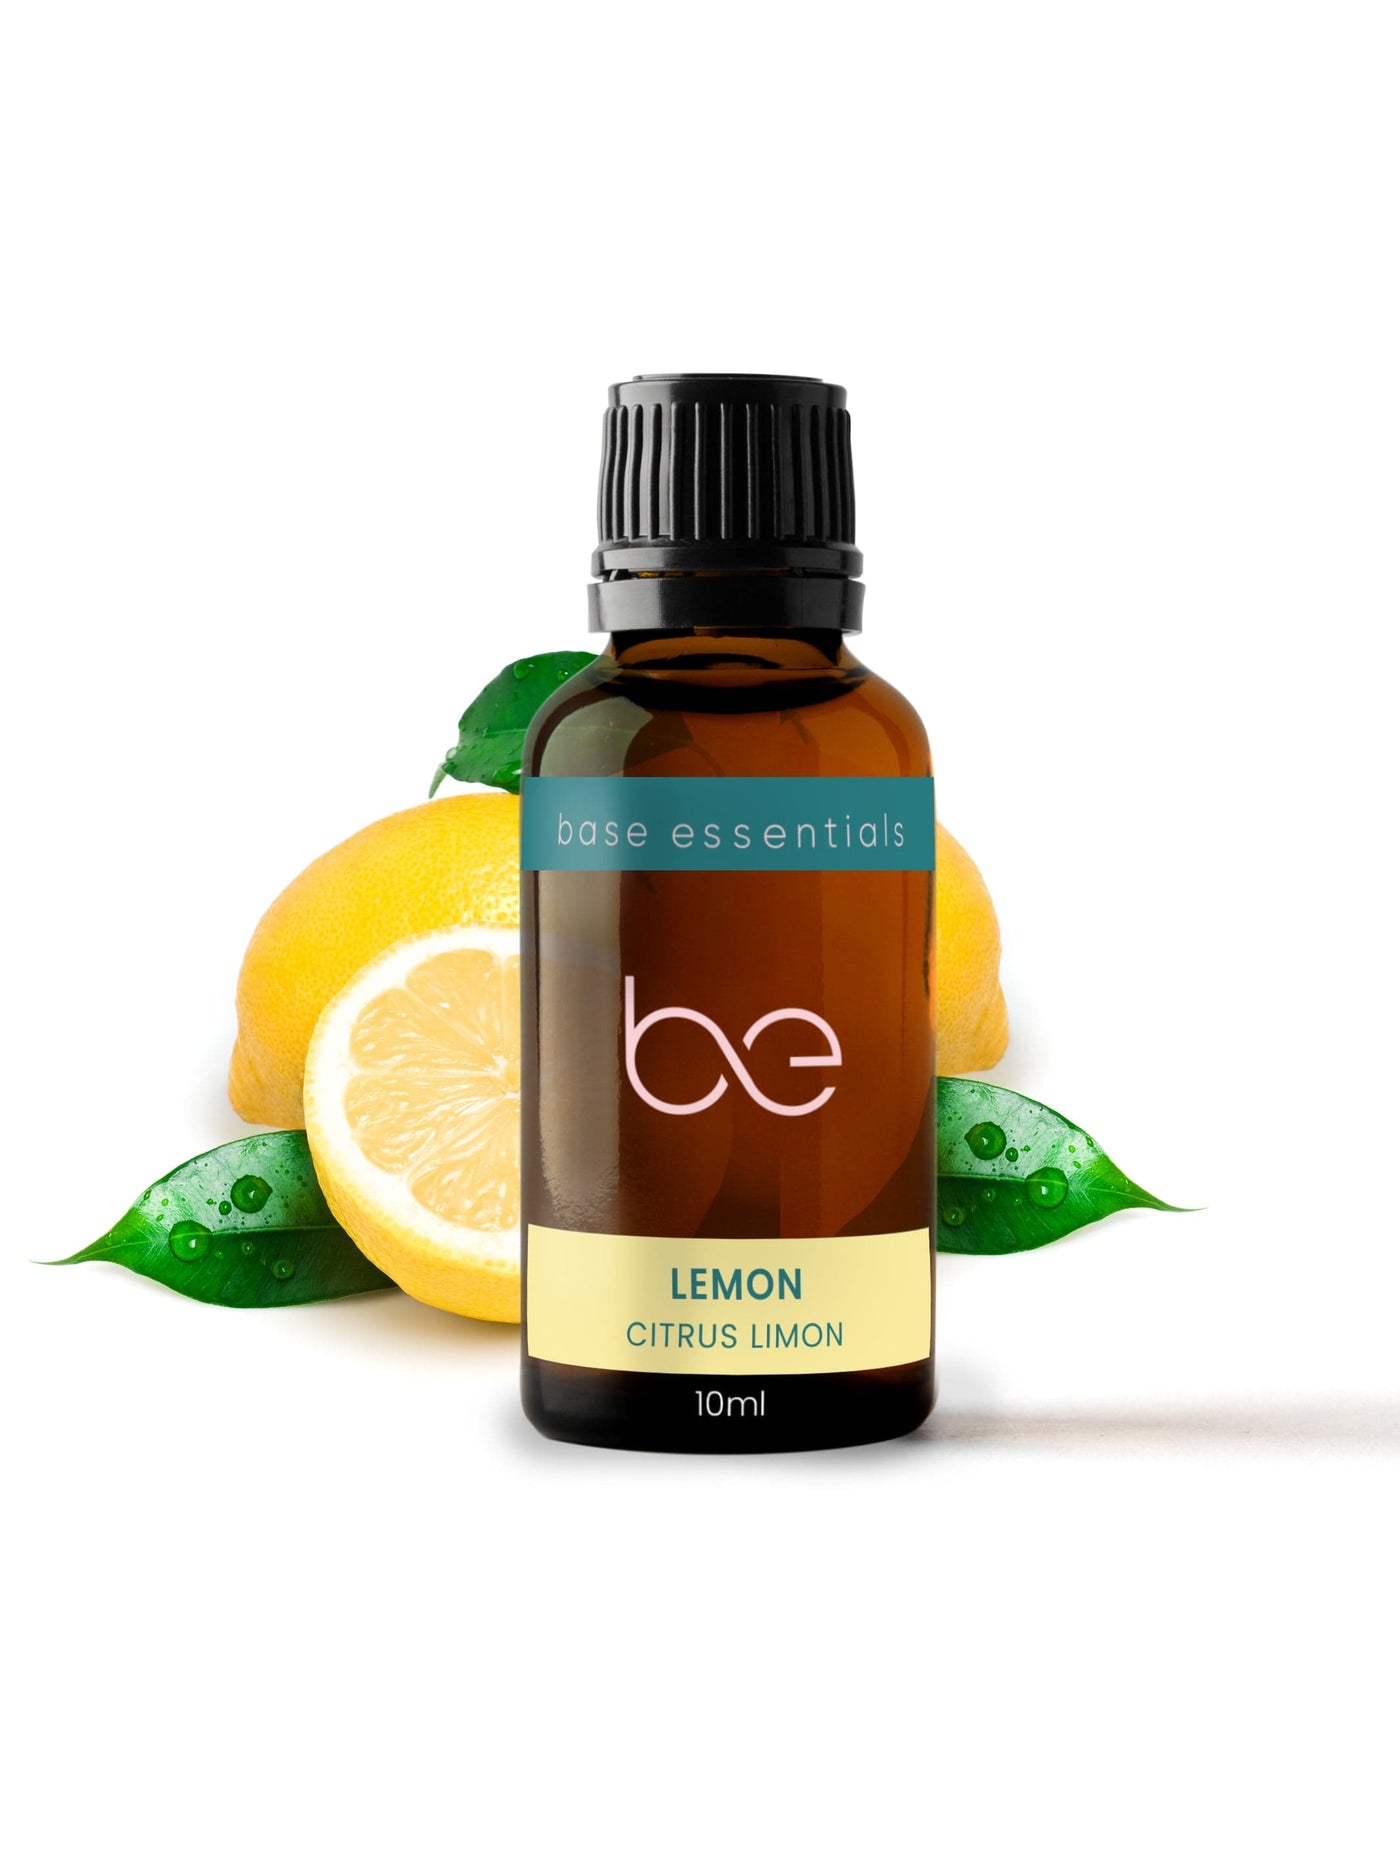 Lemon Essential Oil by White Naturals, Cheerful Aromatherapy Scent, Cold Pressed, 100% Pure, Vegan, Child Resistant Cap, 1 Ounce